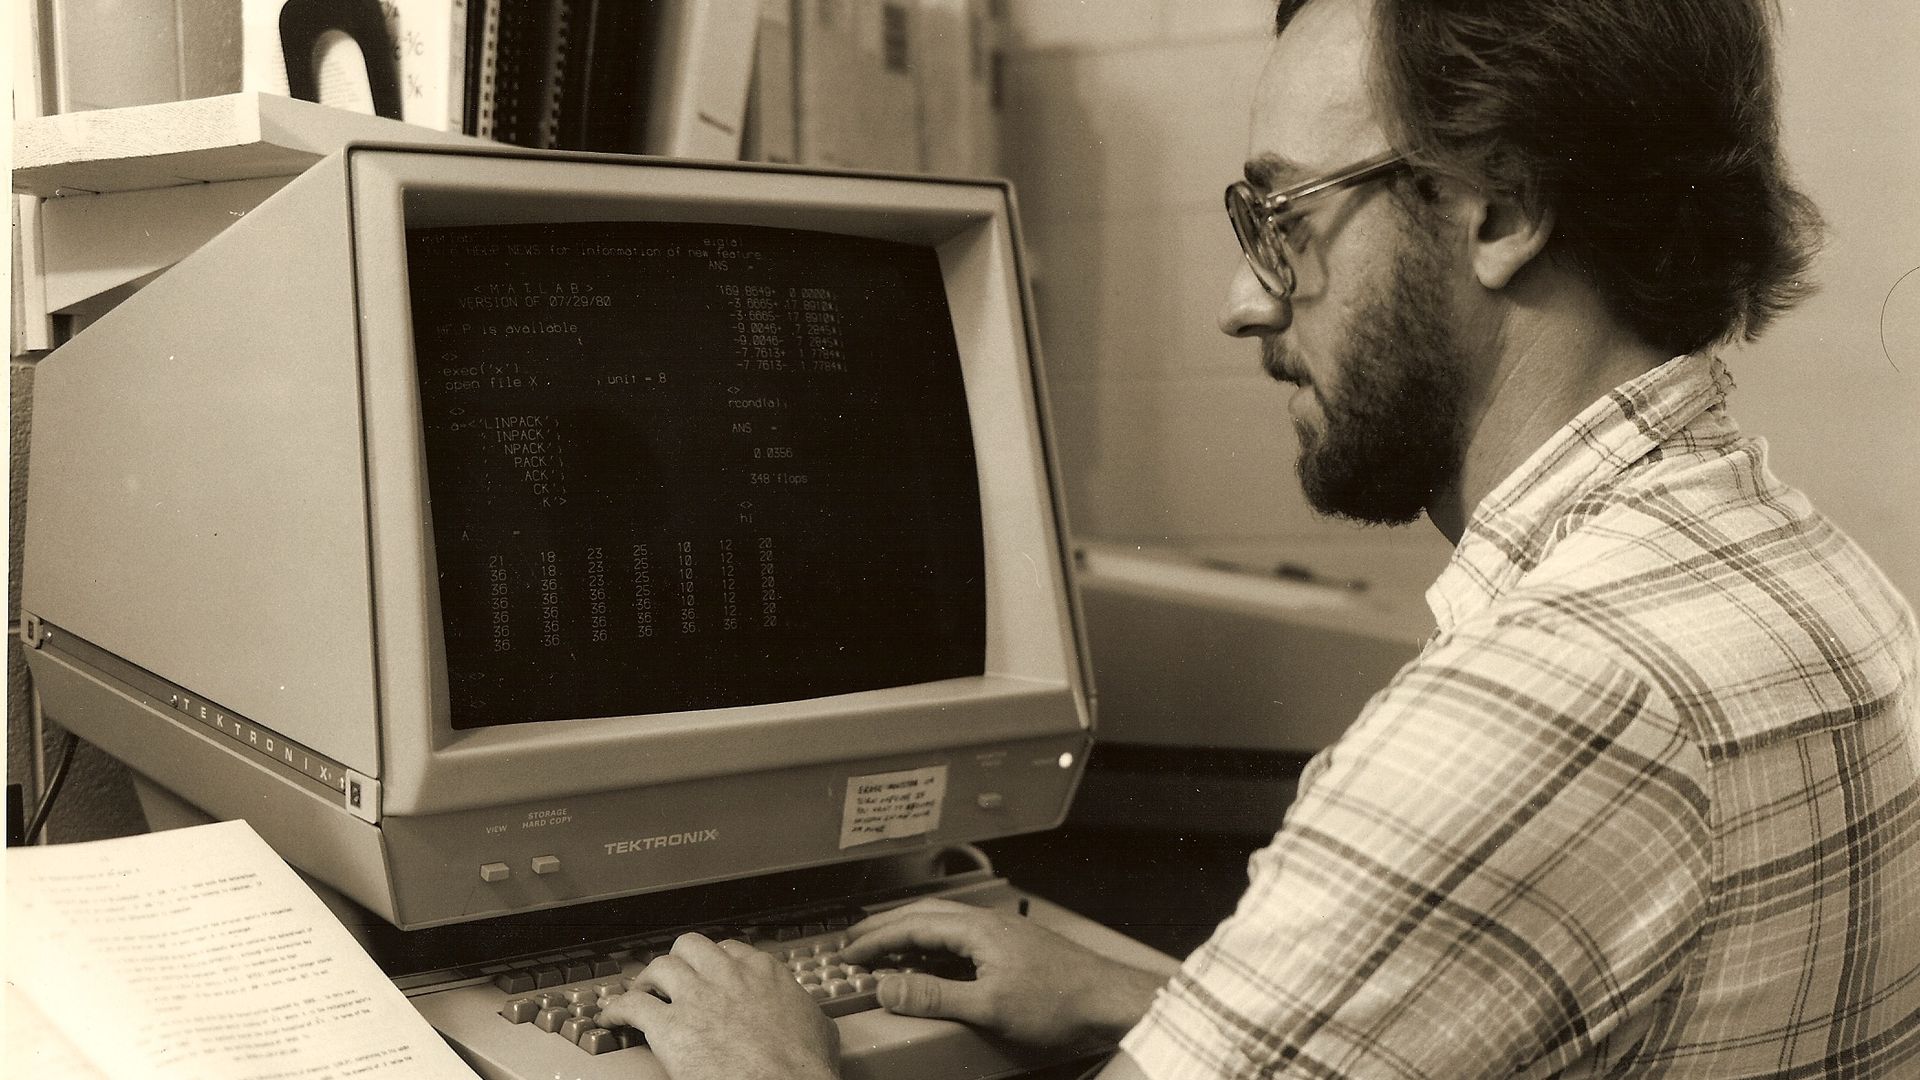 Jack Dongarra, in 1980 at Argonne National Lab, with a Tektronix 4081 Workstation